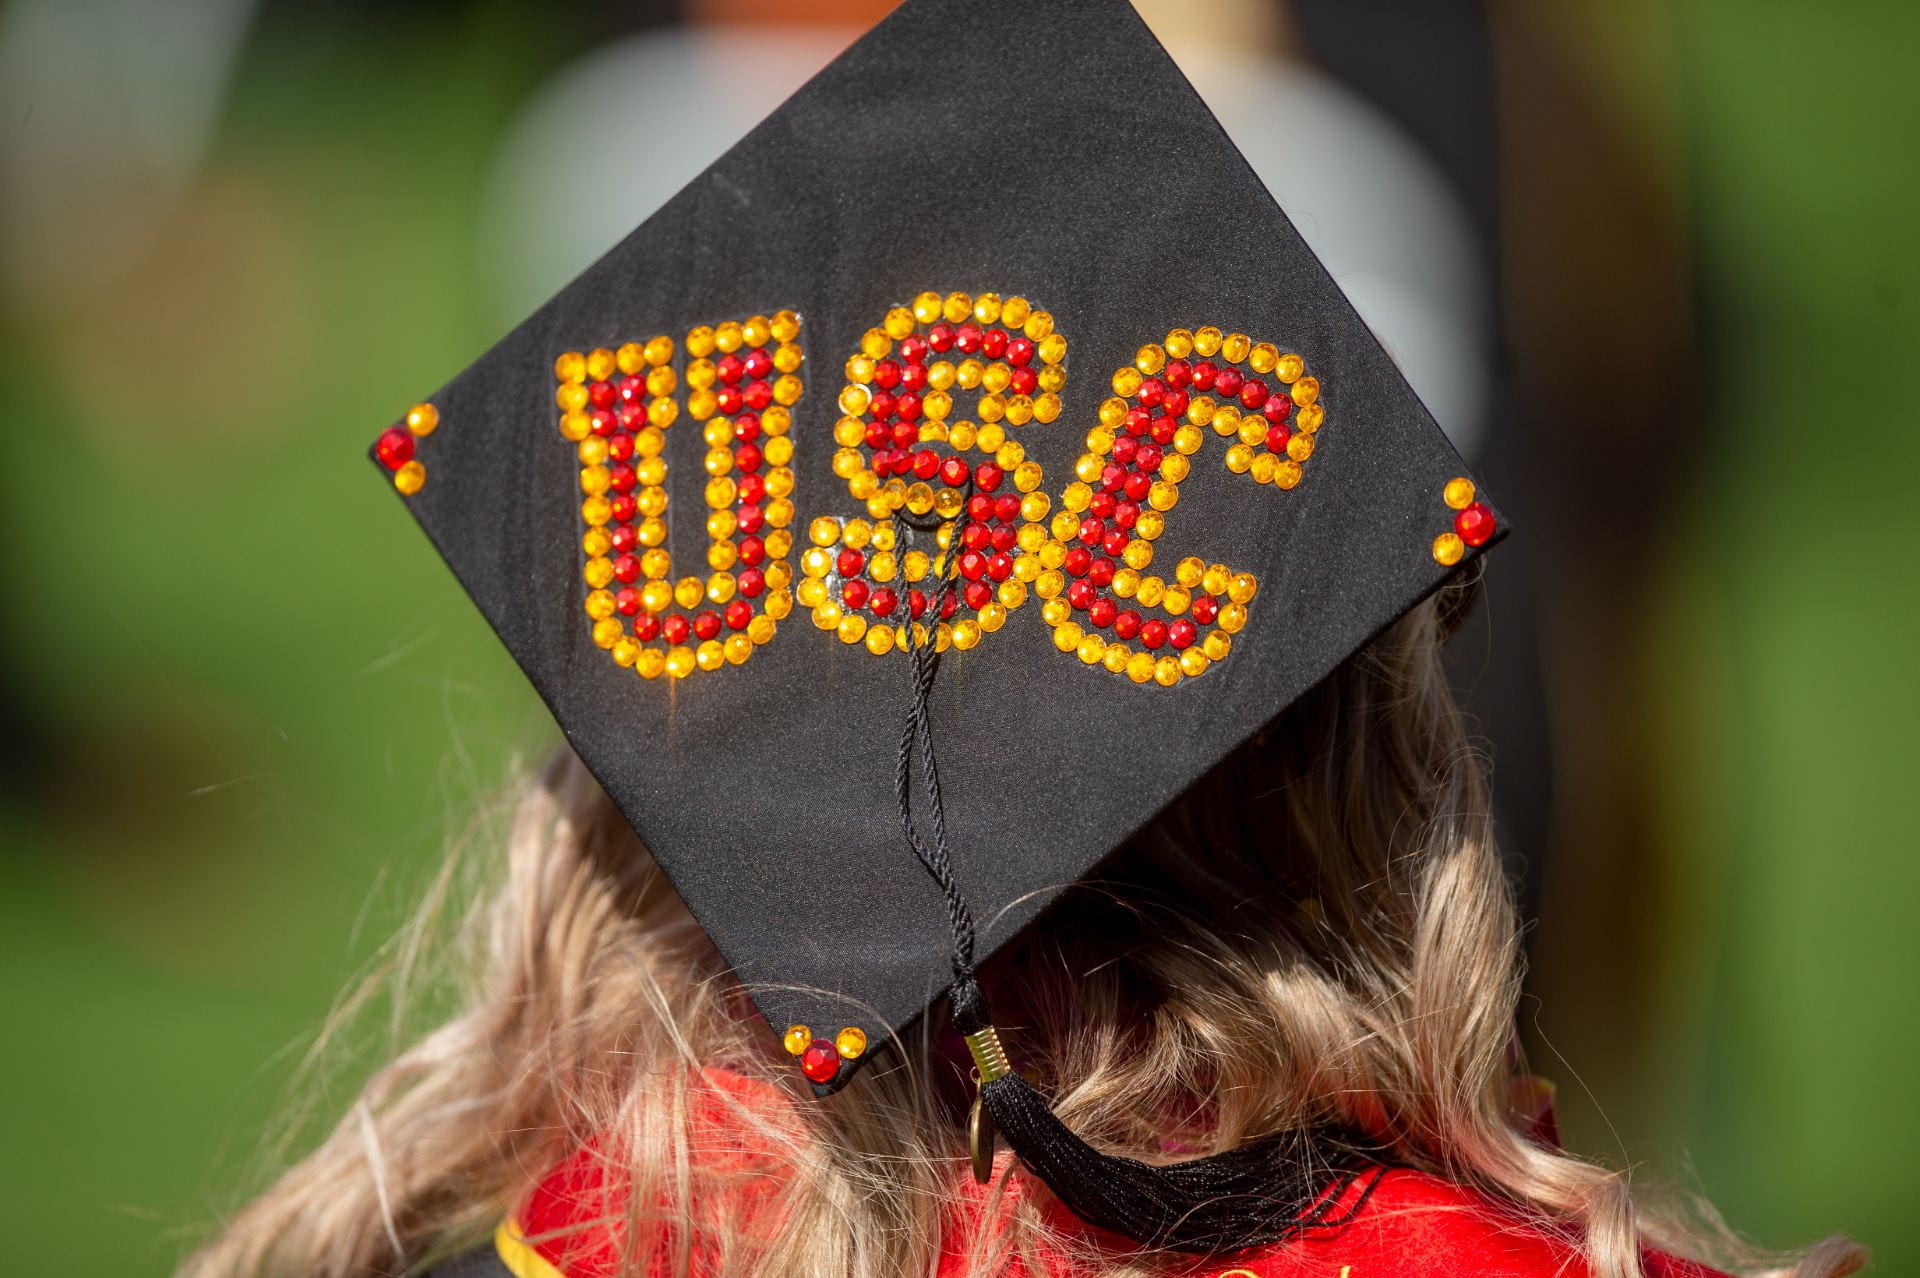 A graduation cap with USC designed on top of it